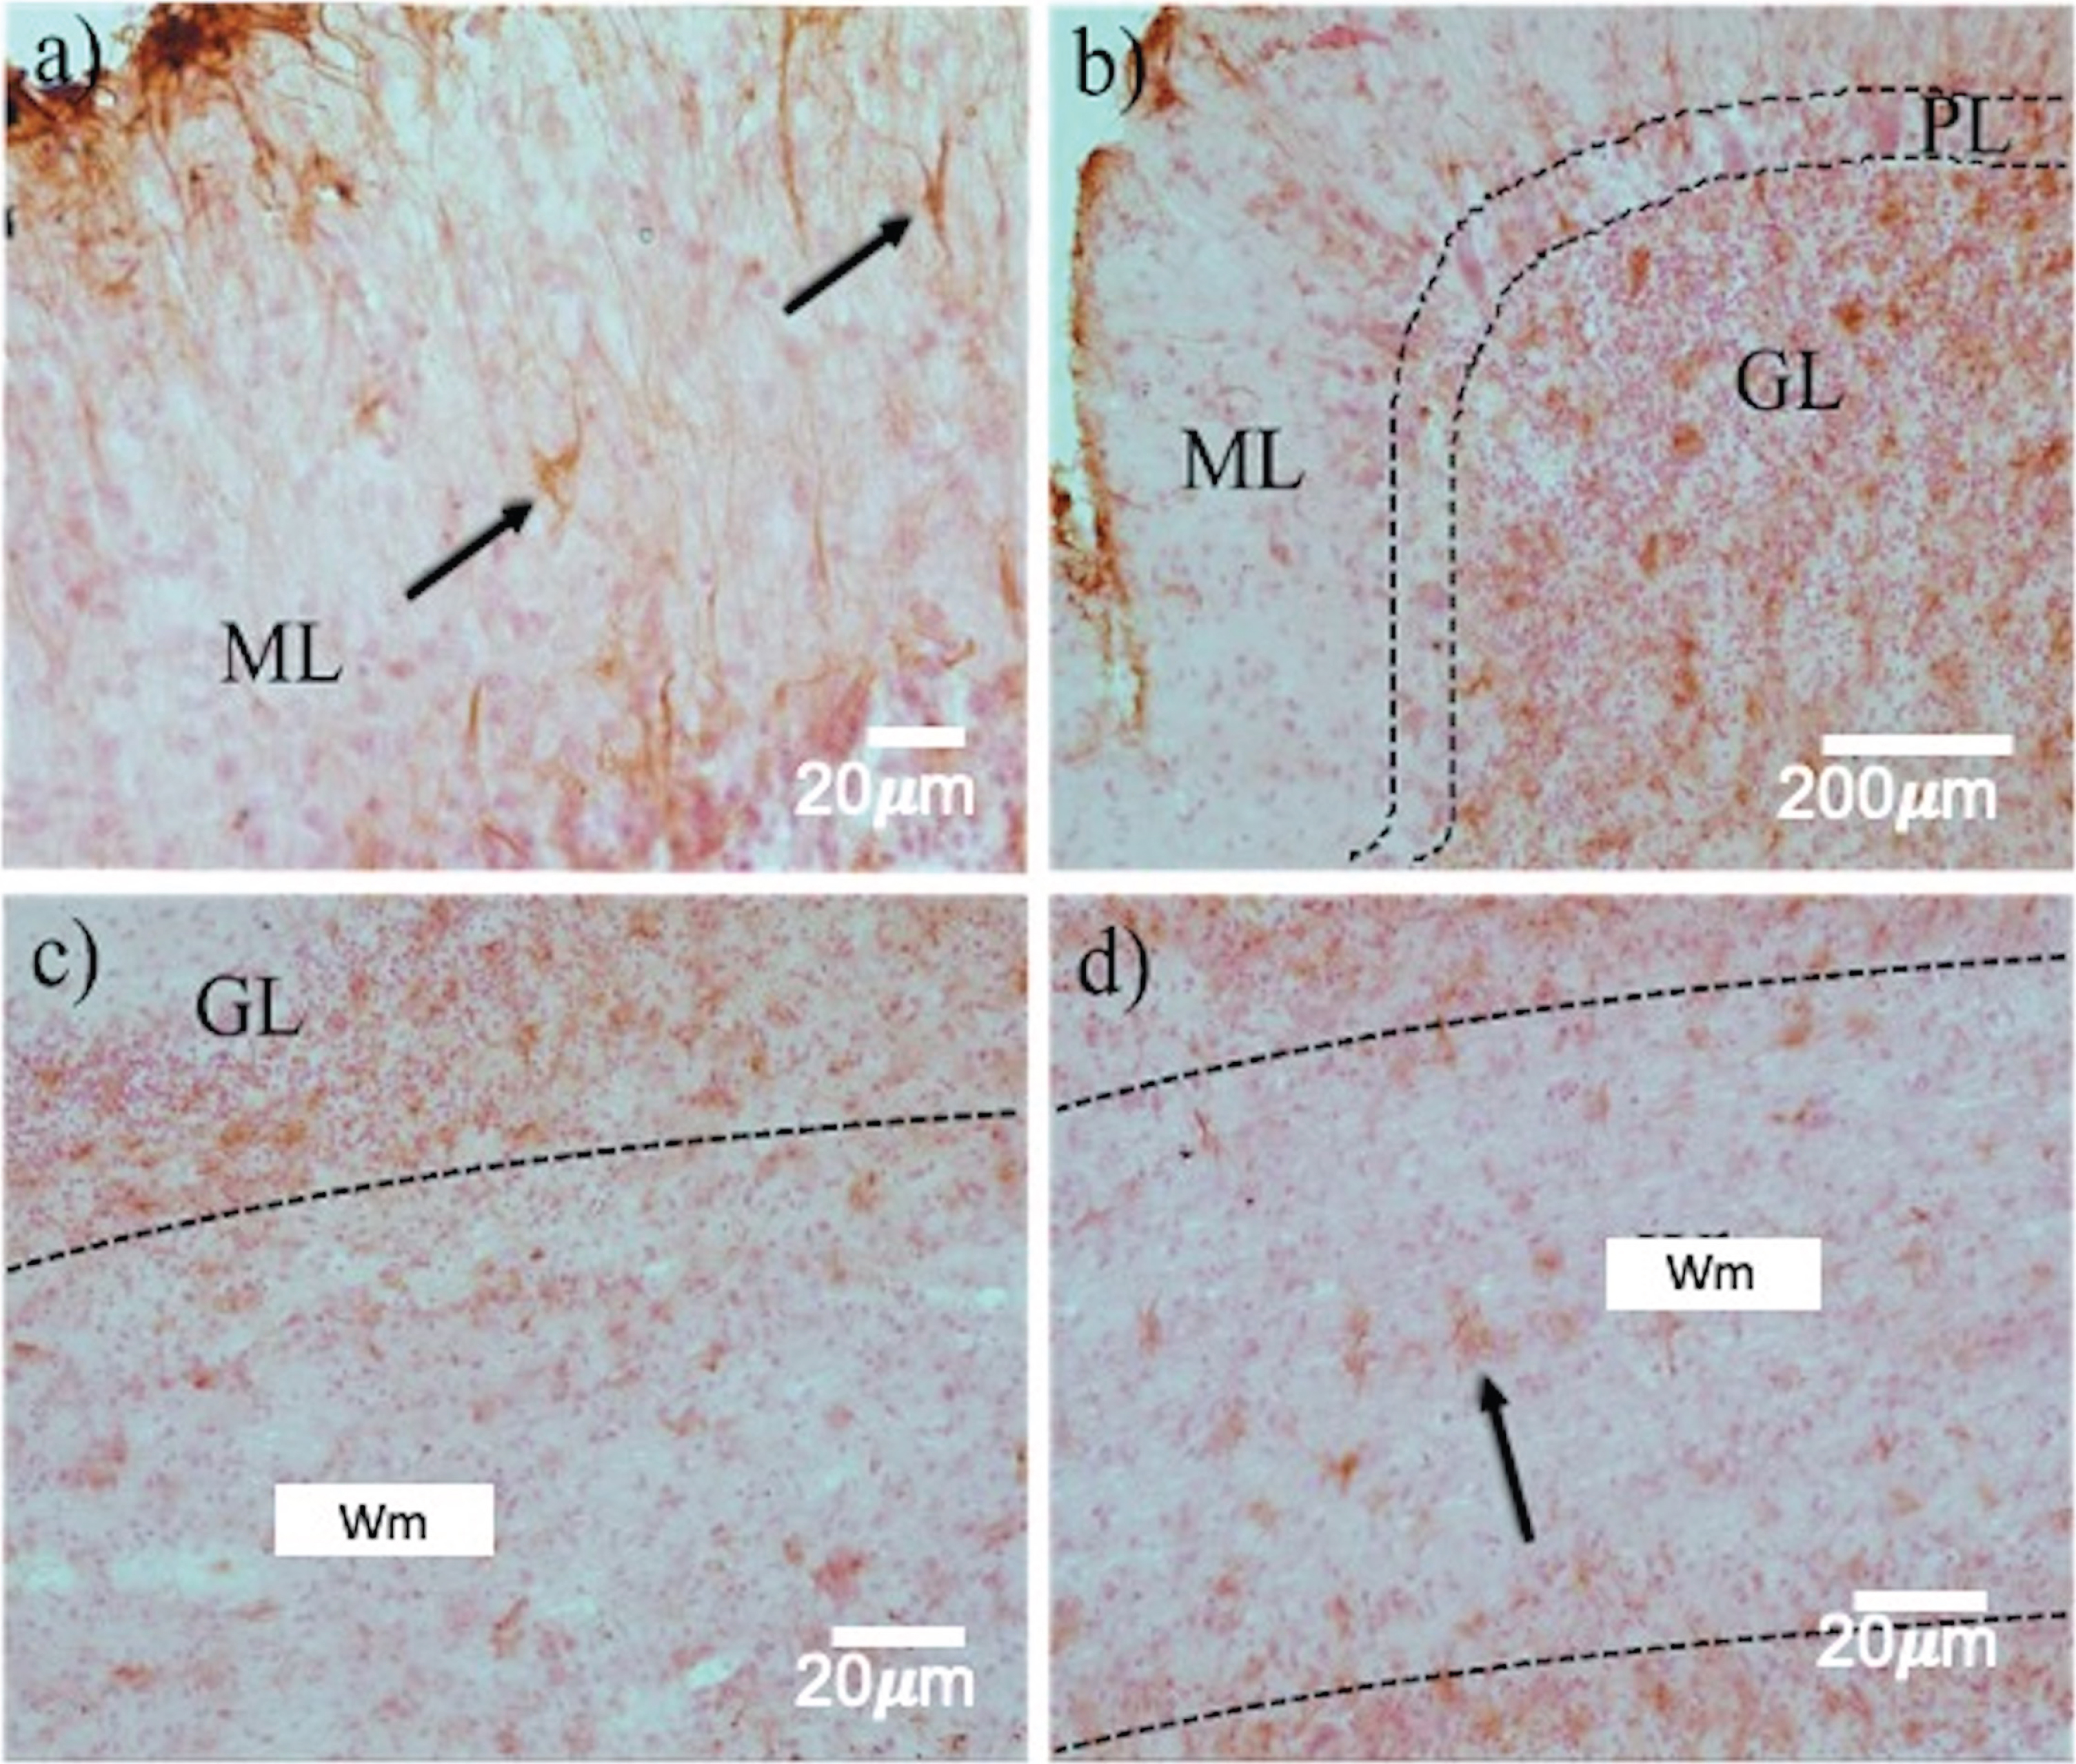 Astrogliosis in the layers of the cerebellum in prion disease. GFAP immunohistochemistry revealed a highly variable expression pattern in the different cell layers. Between ML a) and GL (b, c), a dramatic increase in reactive astrocytes (arrows) was observed. d) In the Wm, astrocytosis is kept in a smaller quantity. ML, Molecular layer; GL, Granular layer; Wm, white matter. White arrows point out Purkinje neurons.